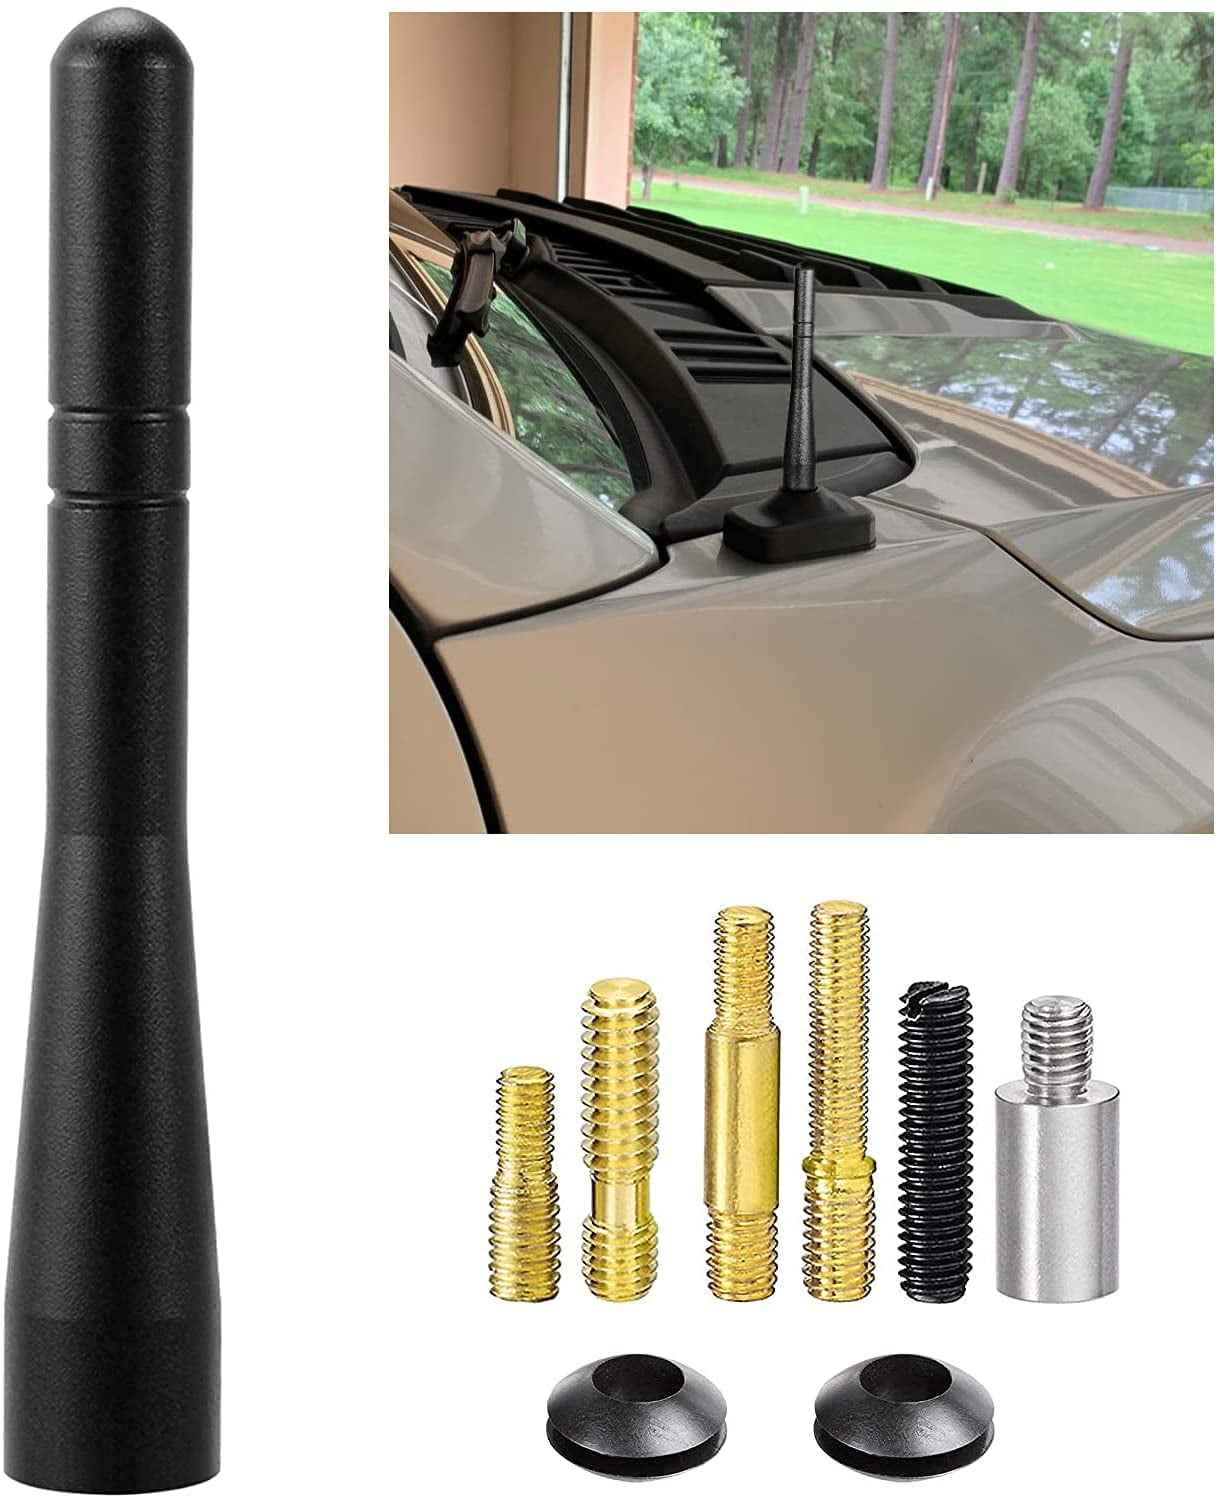 Details about   For 2003-2014 Ford E150 Antenna Mast 12534HK 2004 2005 2006 2007 2008 2009 2010 